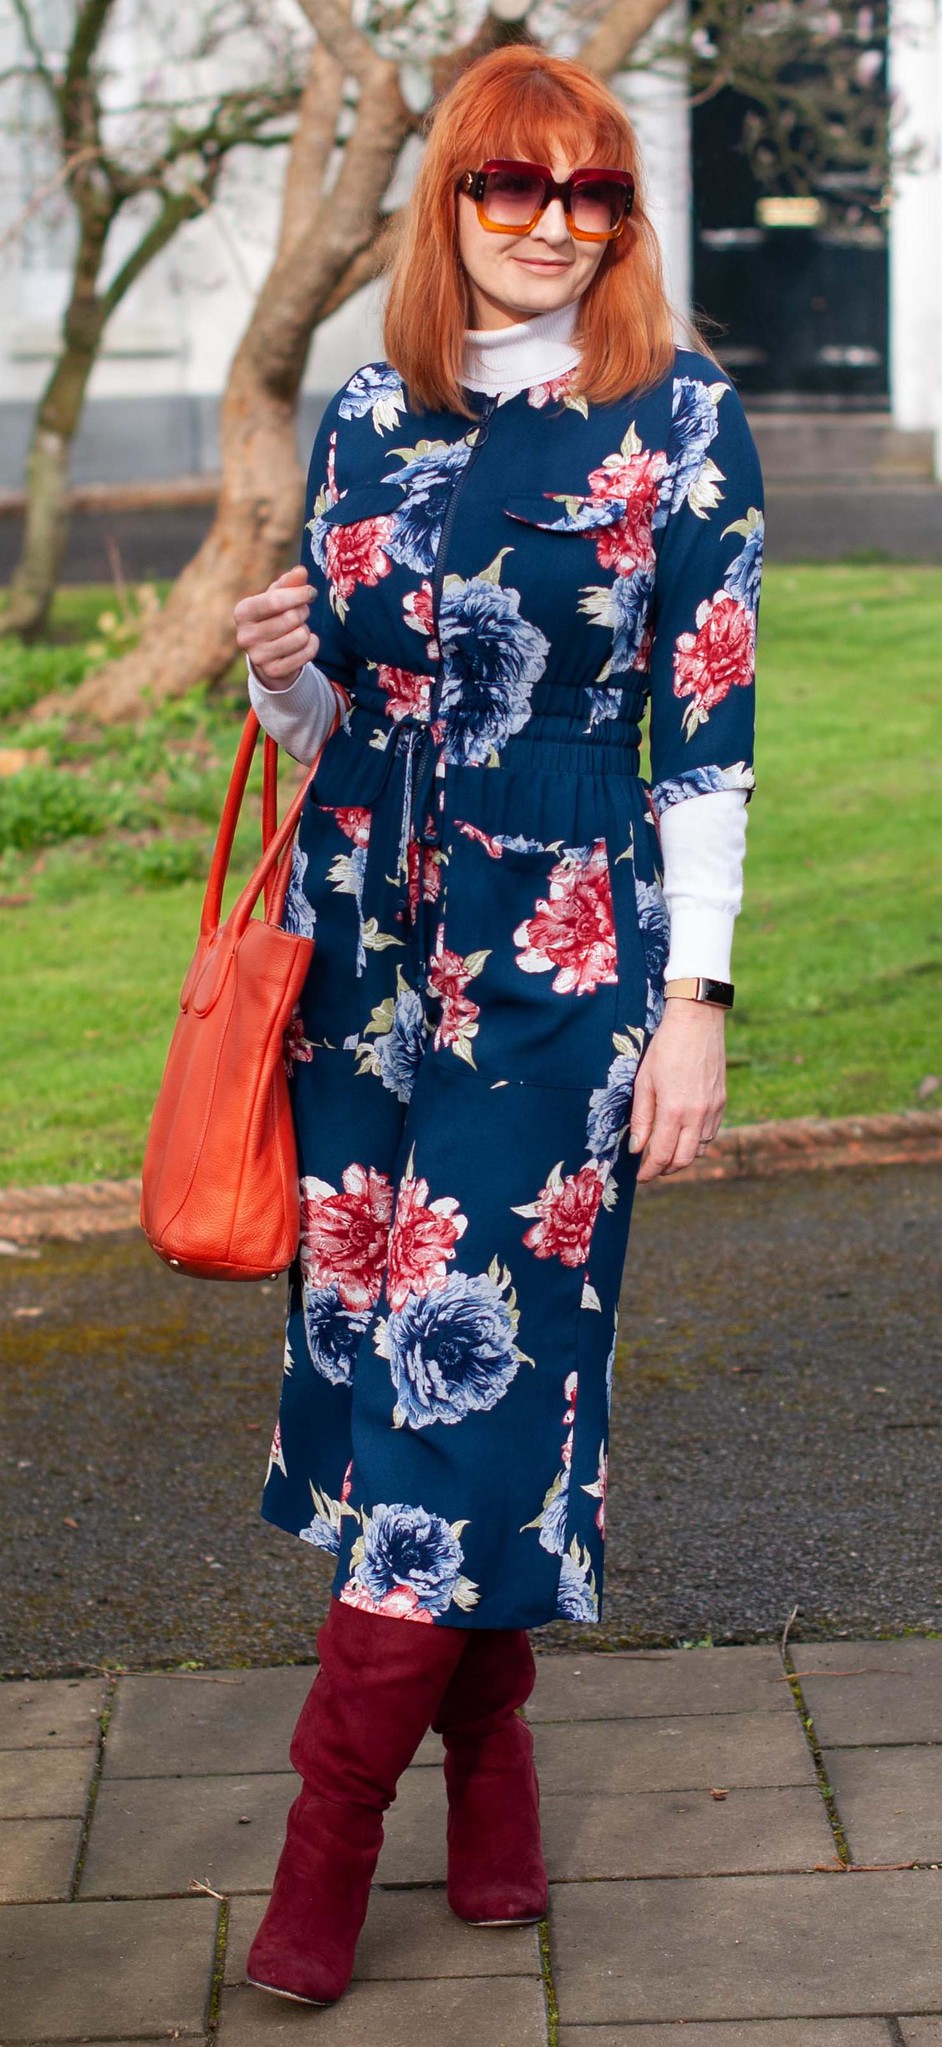 Fashion Over 40: How to Layer a Jumpsuit in Spring (and a Touch of the Elton John) \ navy and red floral jumpsuit \ white roll neck sweater \ burgundy slouch boots \ navy pinstripe coat \ Elton John-style sunglasses | Not Dressed As Lamb style blog